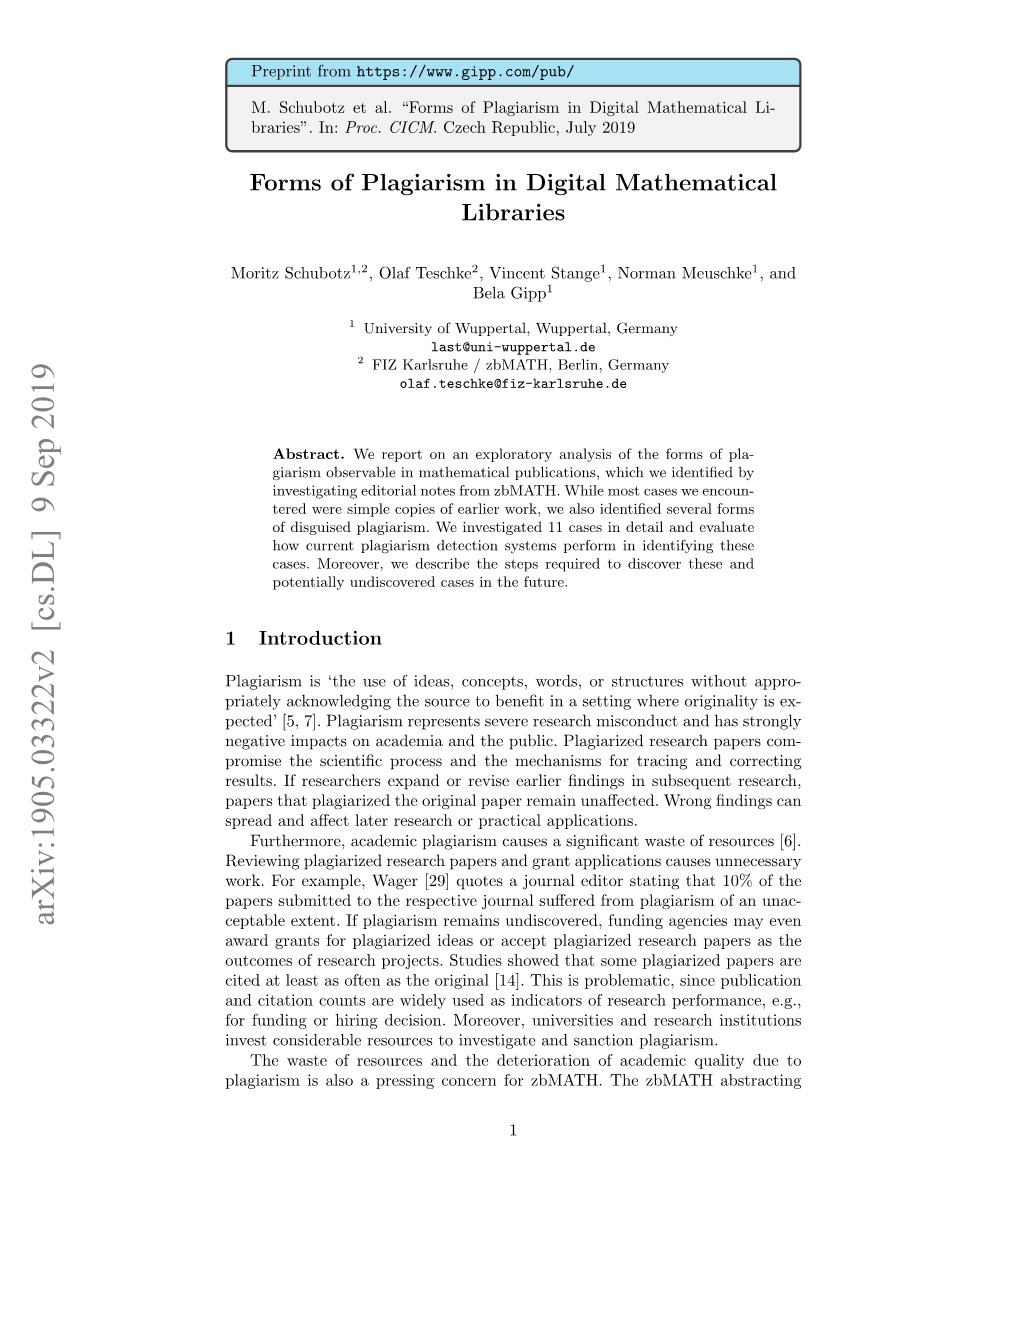 Forms of Plagiarism in Digital Mathematical Libraries